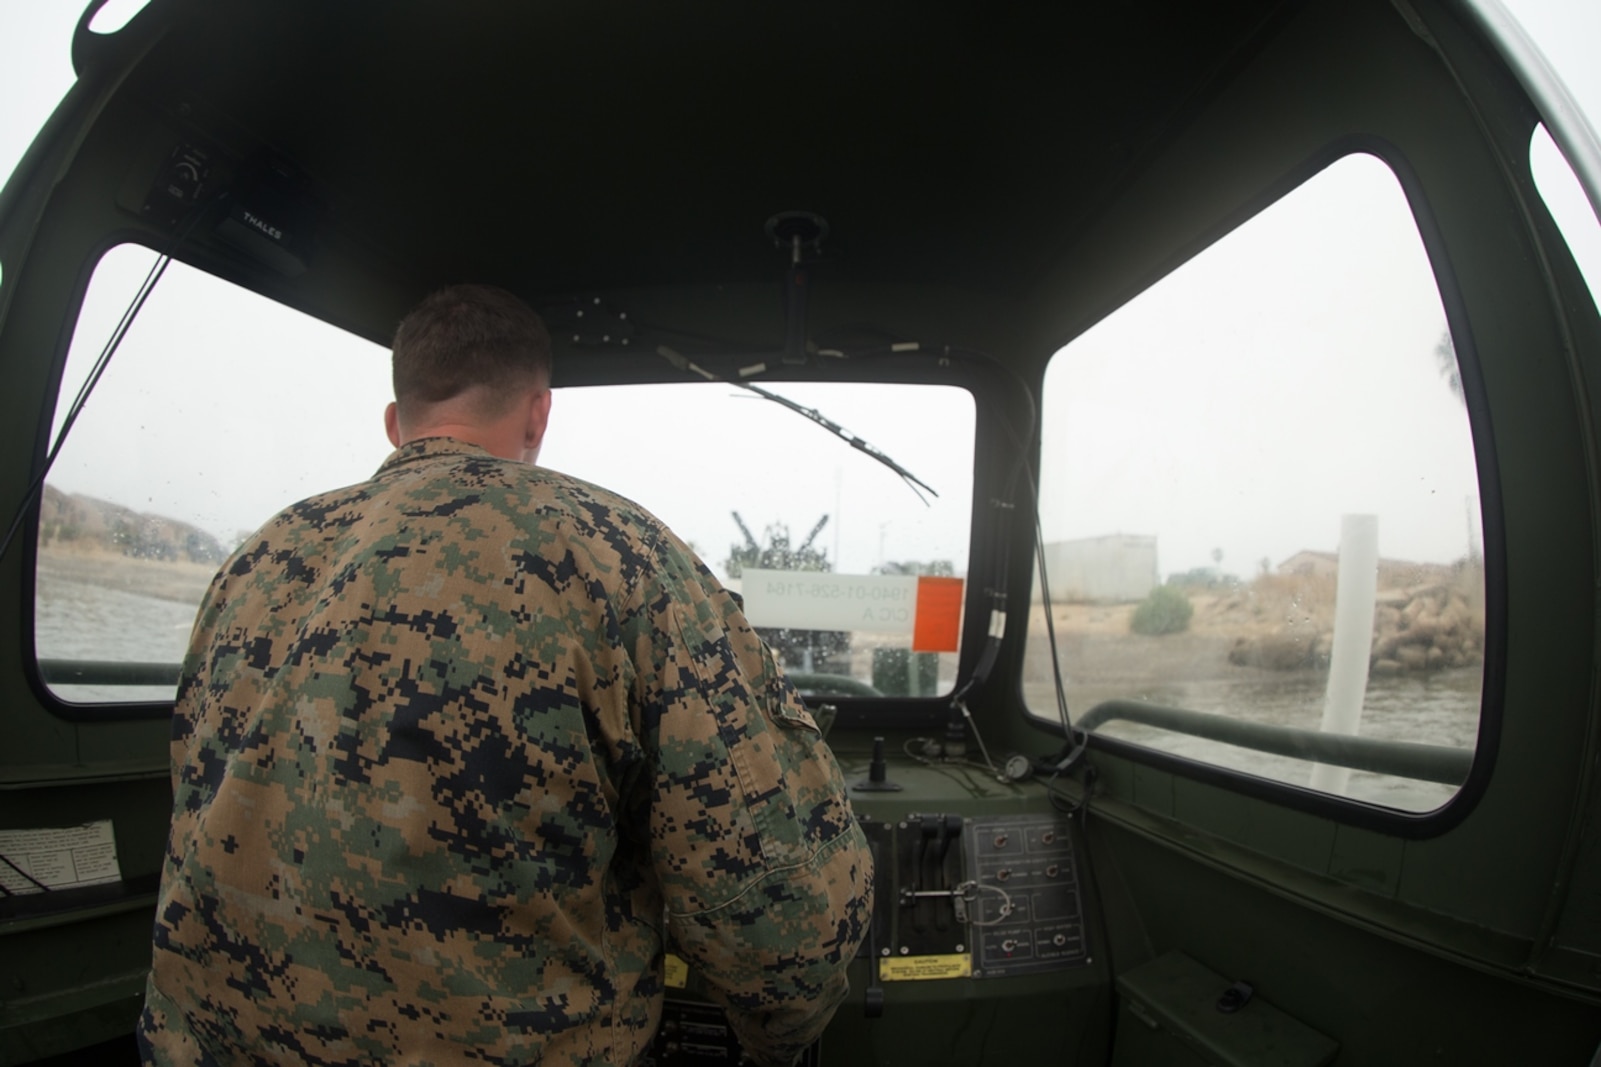 U.S. Marine Cpl. Braxton Shrader, a combat engineer with Bridge Company, 7th Engineer Support Battalion, 1st Marine Logistics Group observes his surroundings while on the Bridge Erection Boat (BEB) during a boat licensing course along the coast of Camp Pendleton, Calif., June 21, 2017 The BEB deploys improved ribbon bridges, which are long two-way platforms used to transport heavy equipment, such as tanks, over bodies of water.  (U.S. Marine Corps photo by Lance Cpl. Timothy Shoemaker)